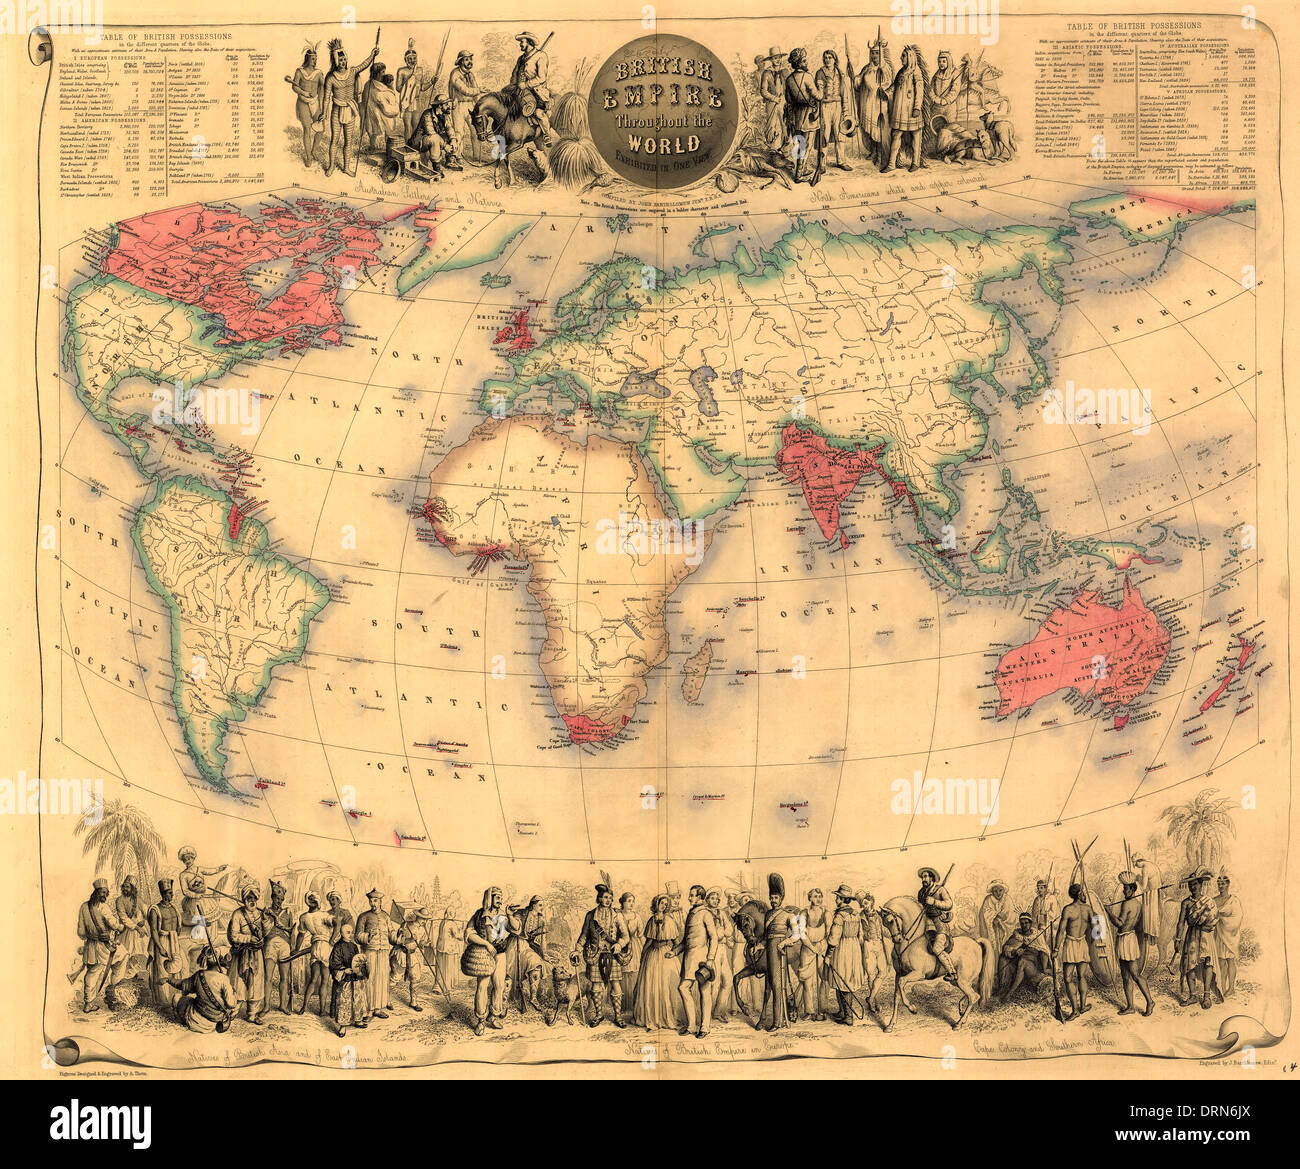 British Empire throughout the world exhibited in one view, circa 1850 Stock Photo